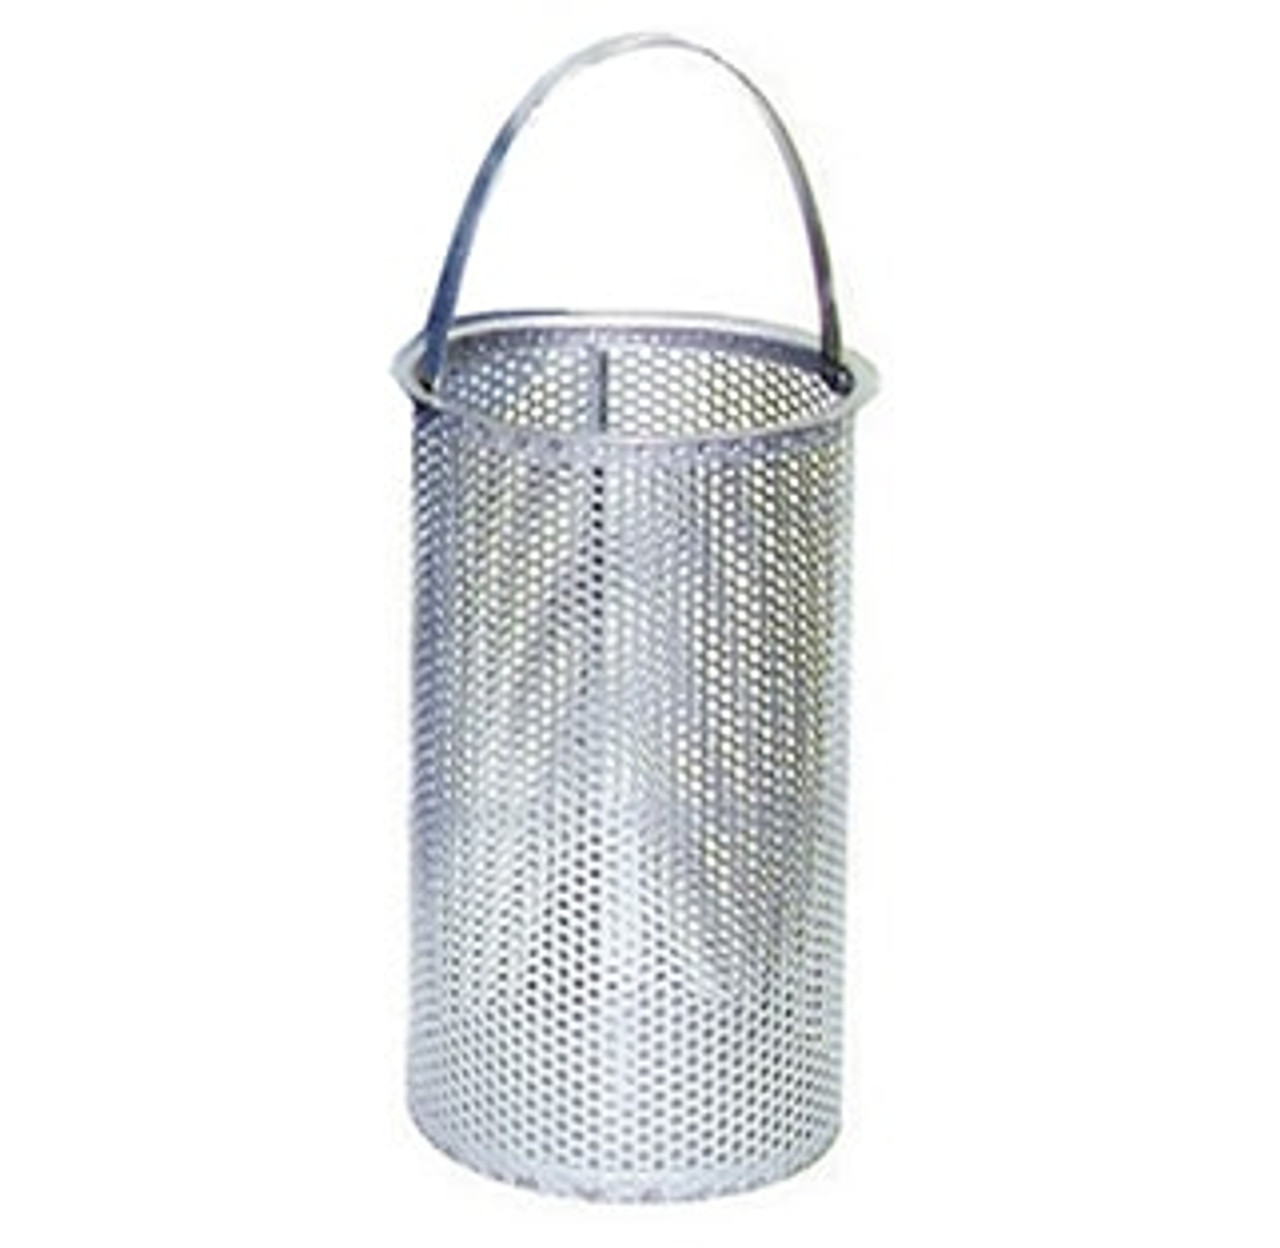 1/4" Perforated Replacement Basket for Eaton Model 72 Strainer Size 2-1/2"